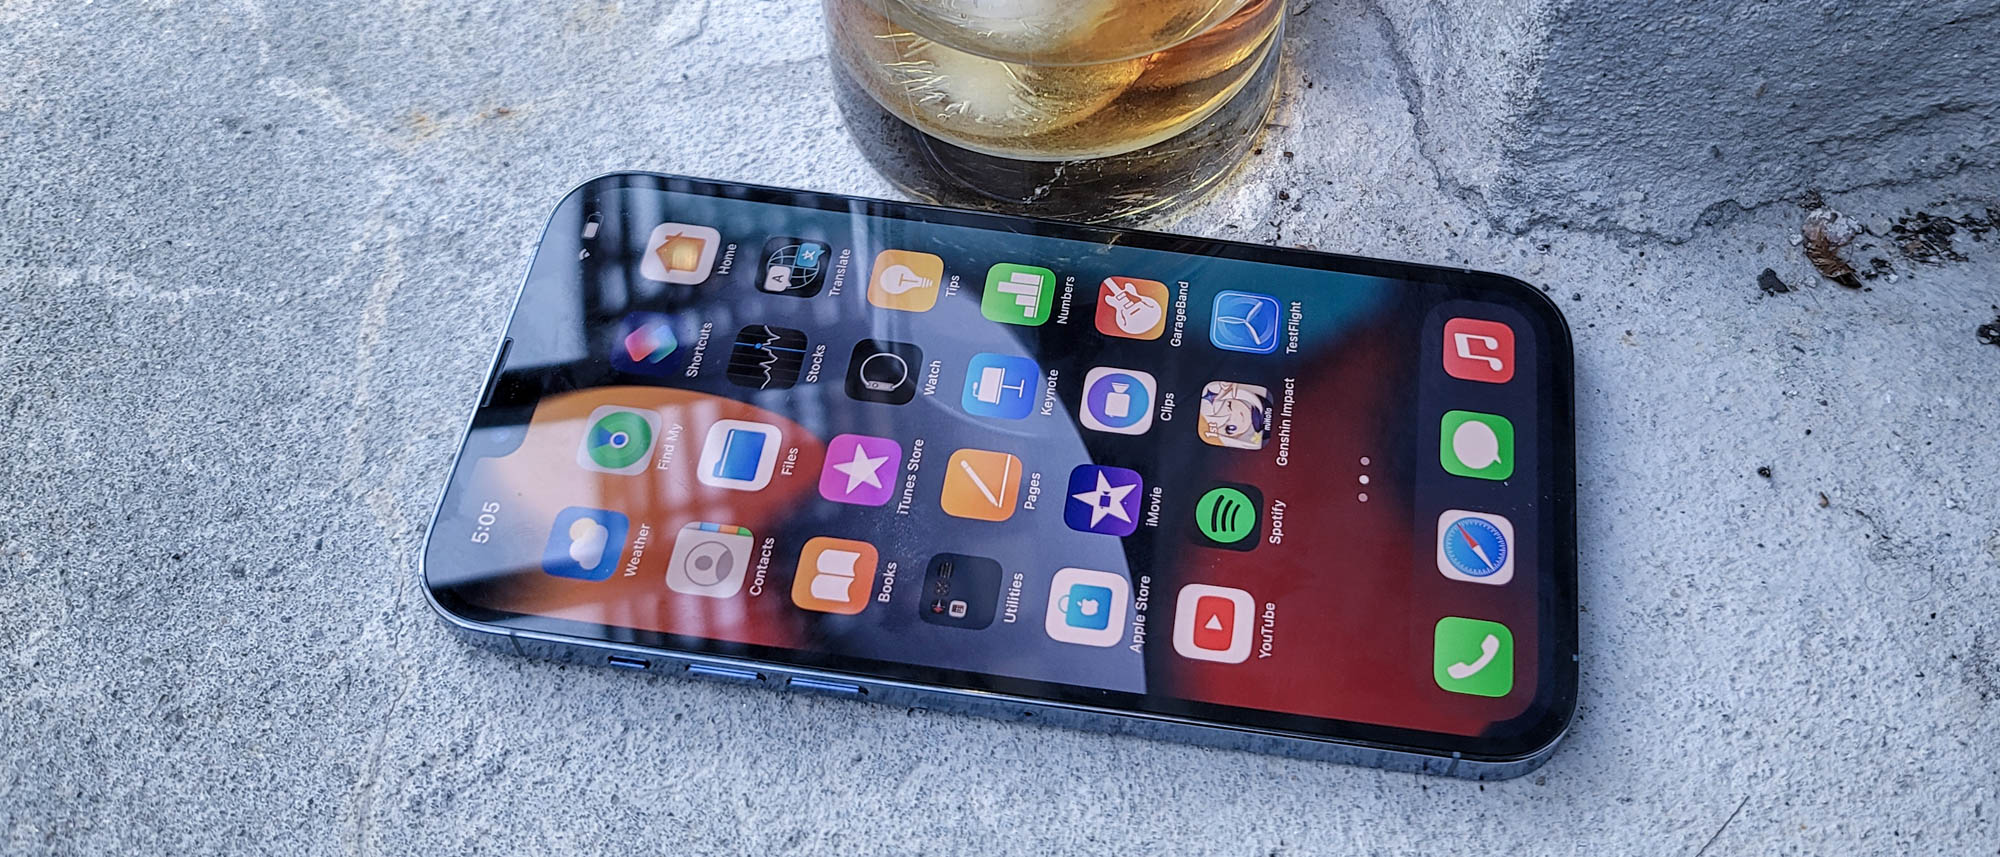 iPhone 13 Pro Max review: Meet the new king of smartphones